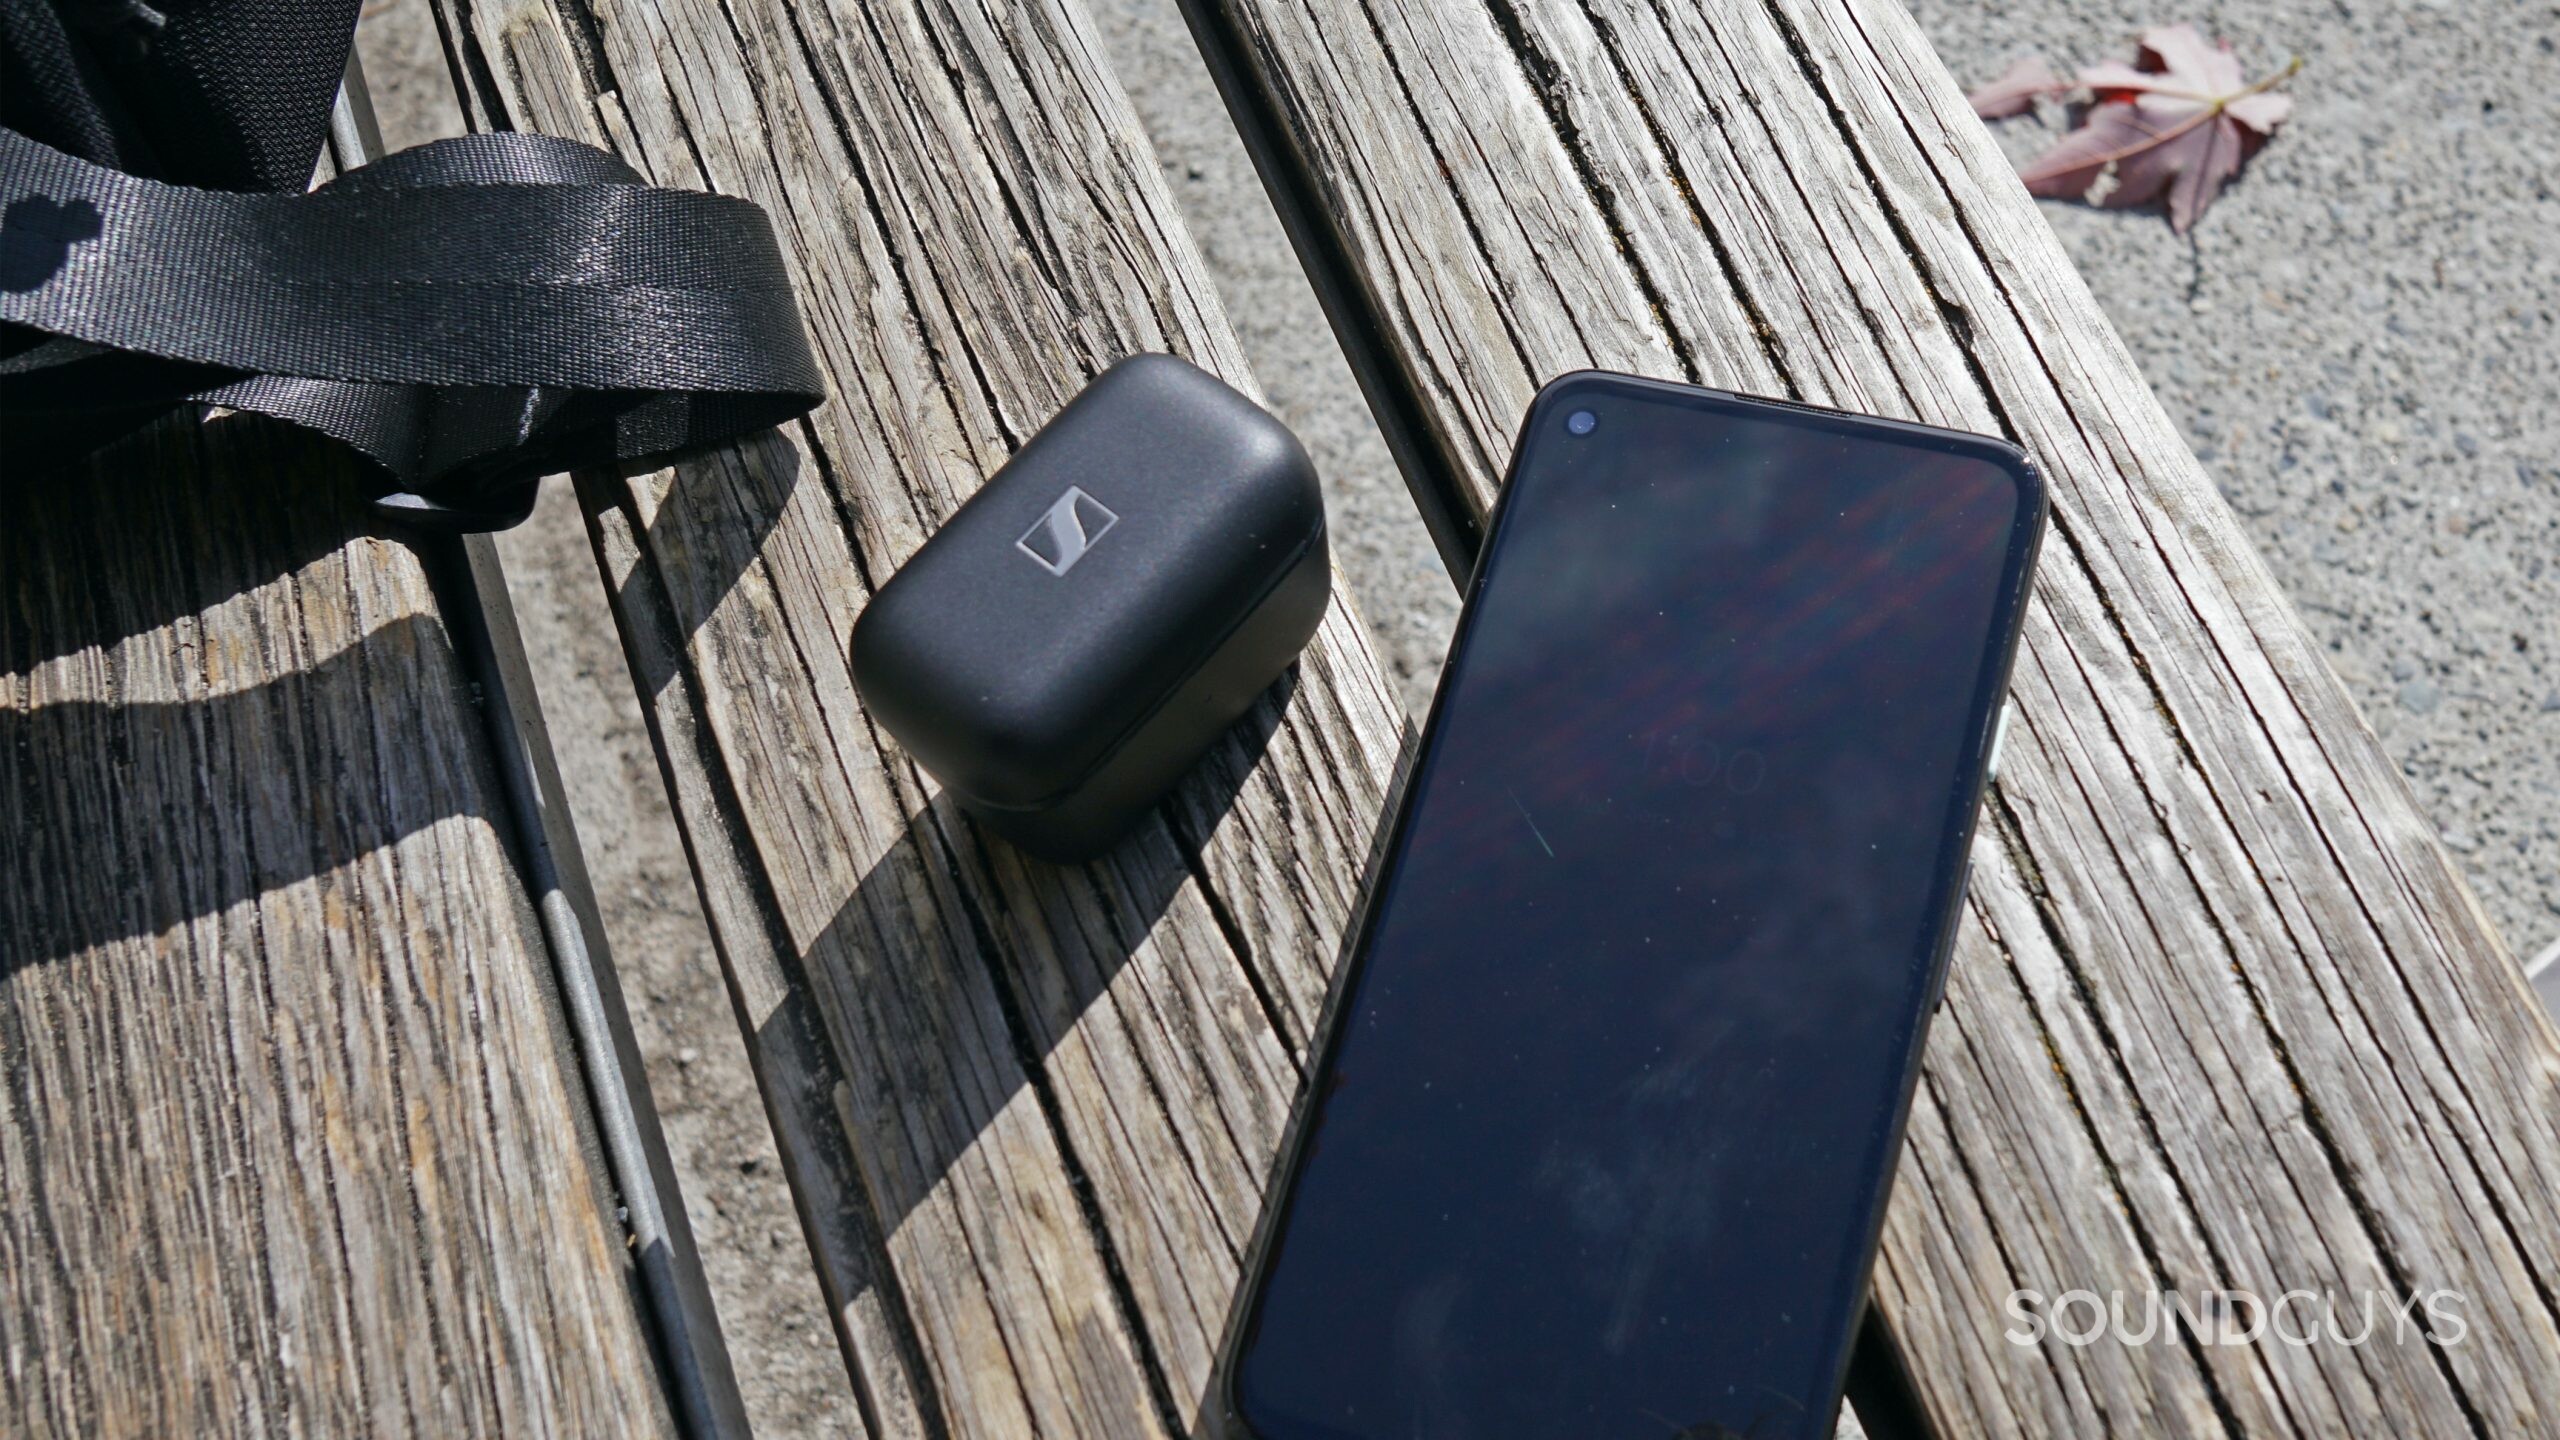 The Sennheiser CX Plus True Wireless earbuds case sits on a bench next to a camera bag and a Google Pixel 4a